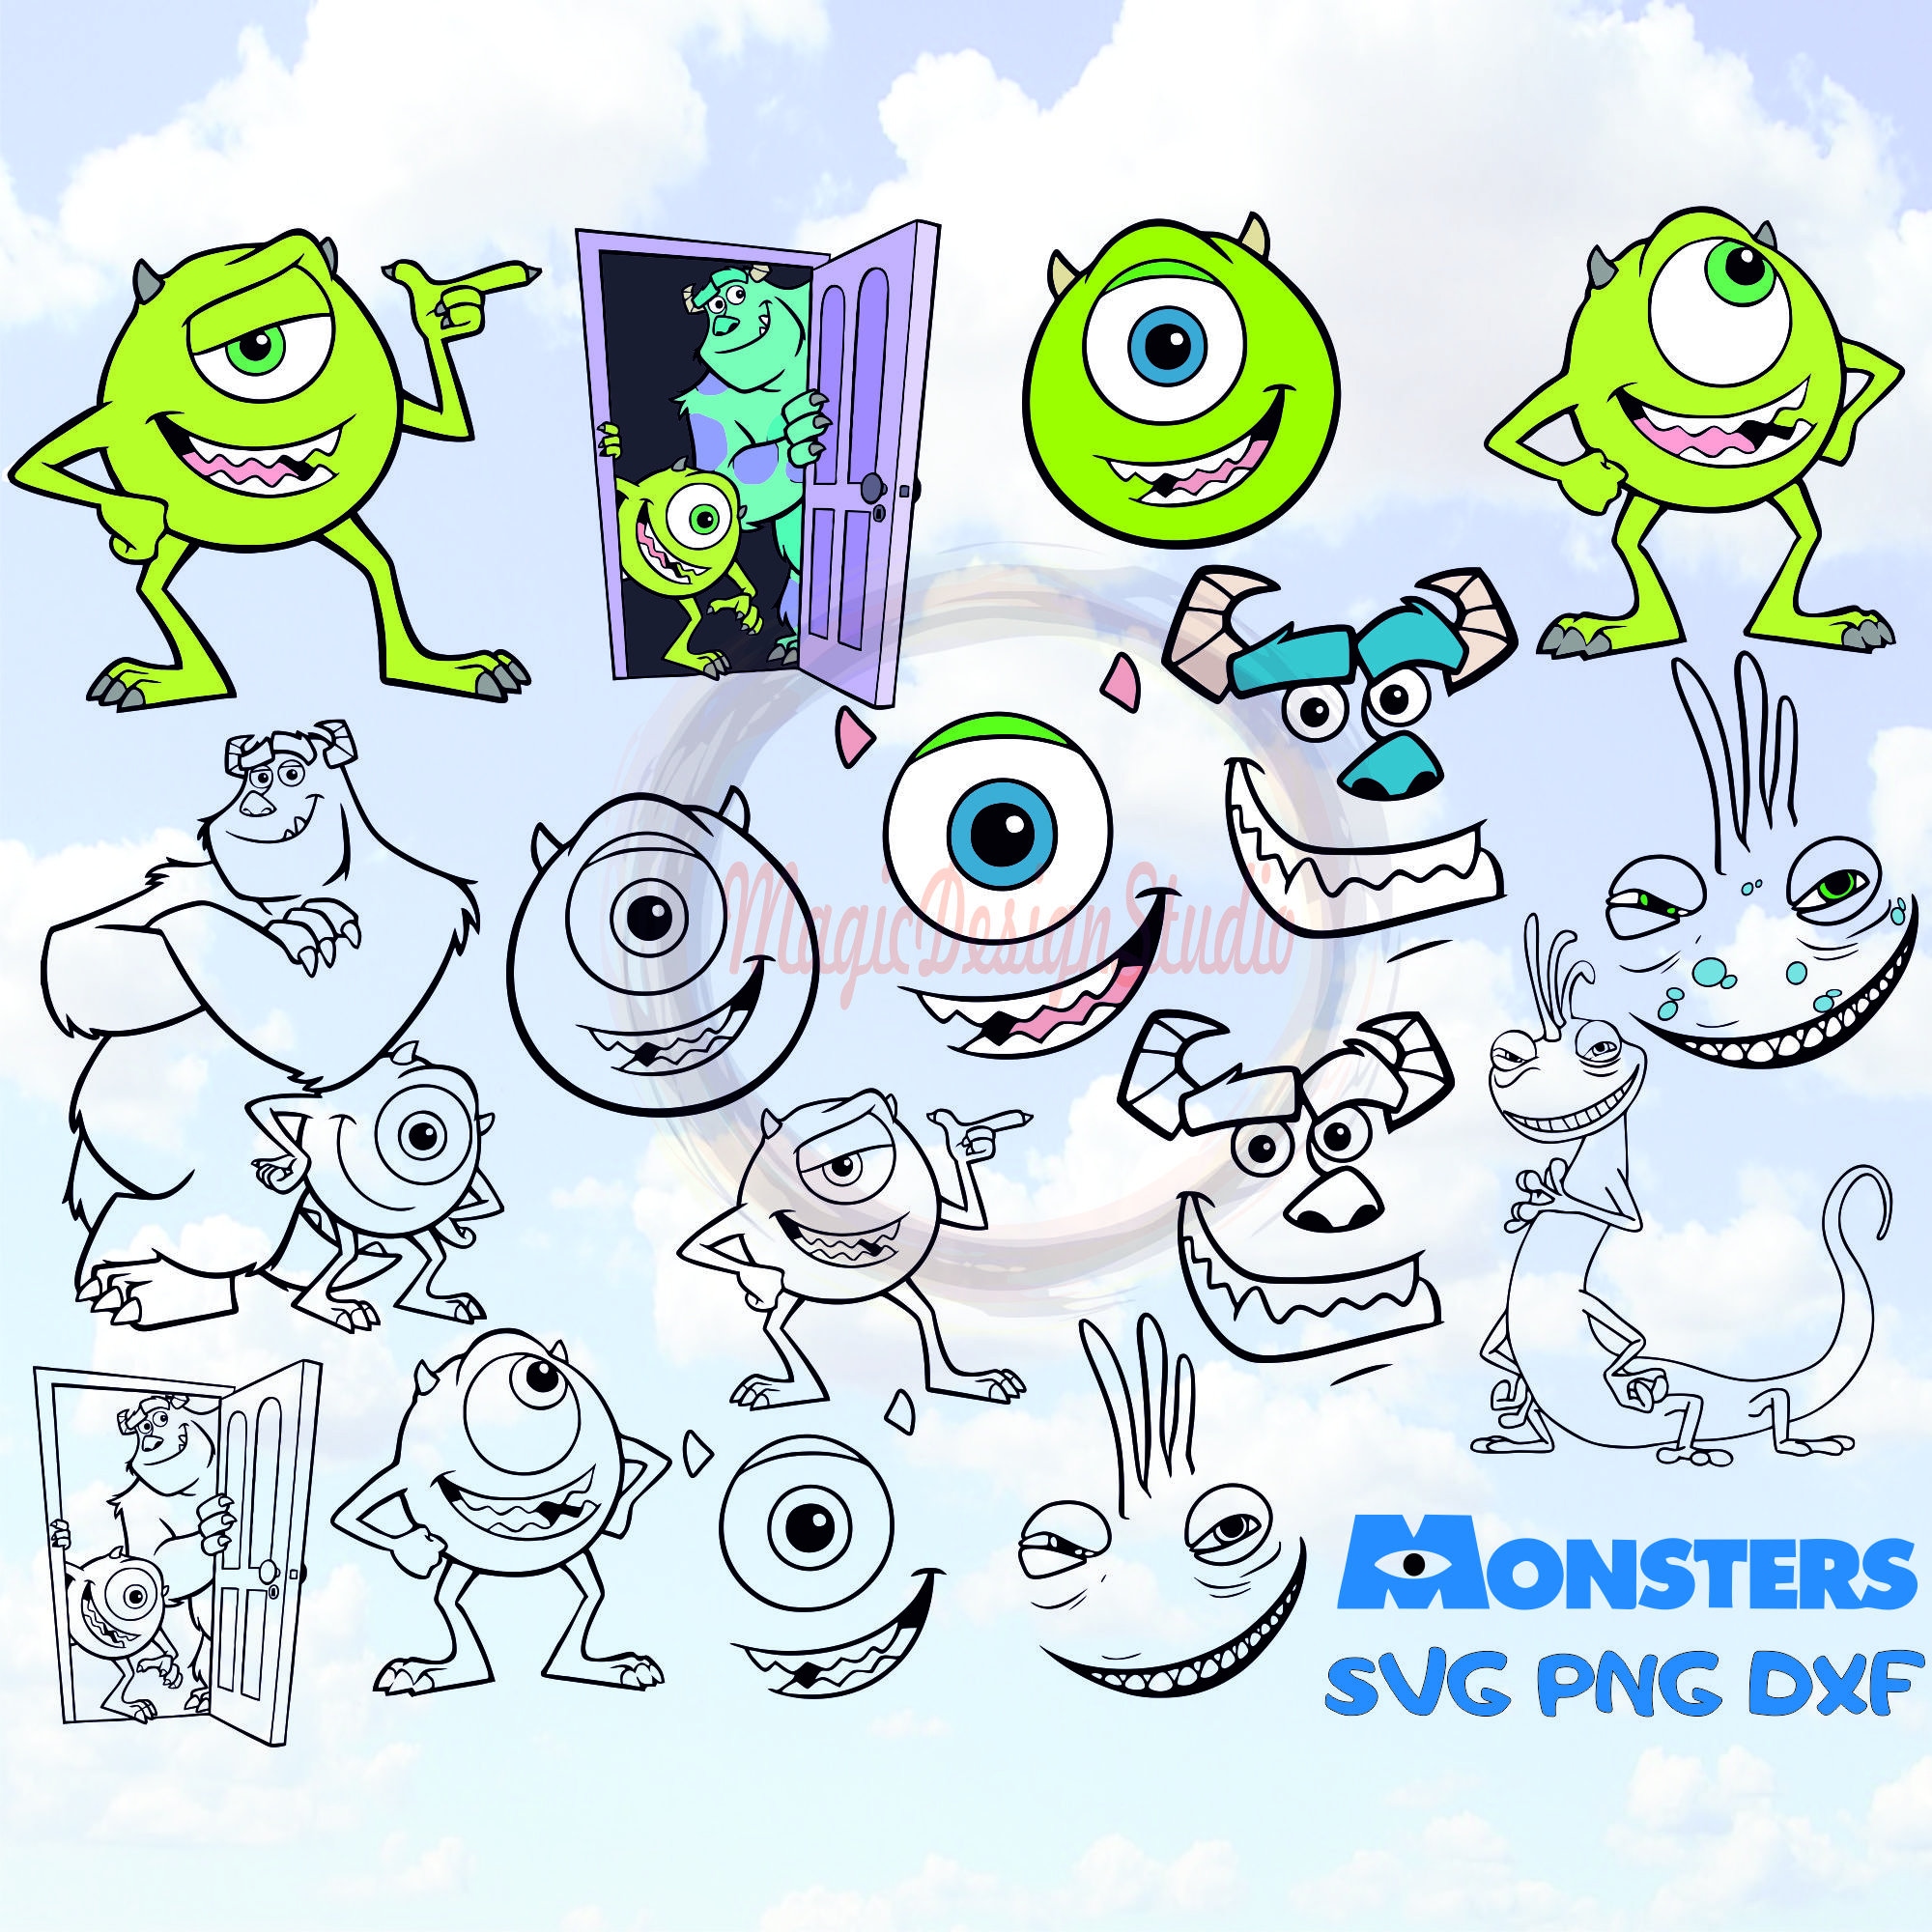 Monsters Inc Svg Cut File Layered Svg Cut File Best Free Fonts For